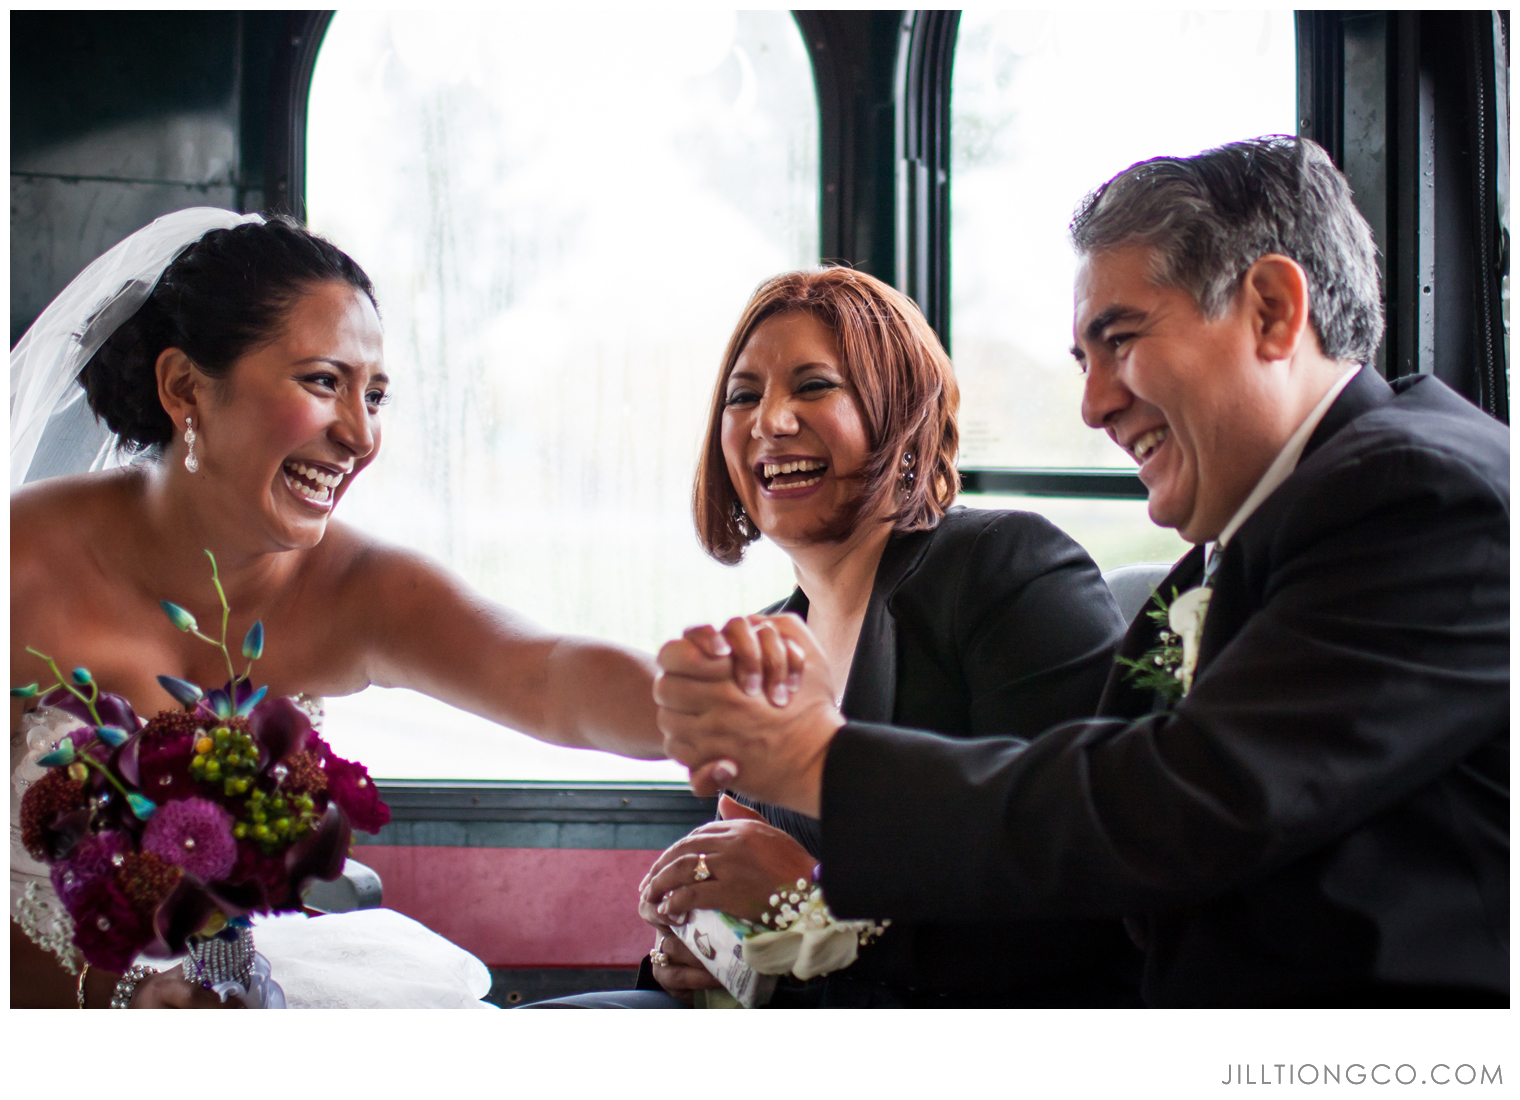 Jill Tiongco Photography | Moment of the Month | Chicago Bride with Parents